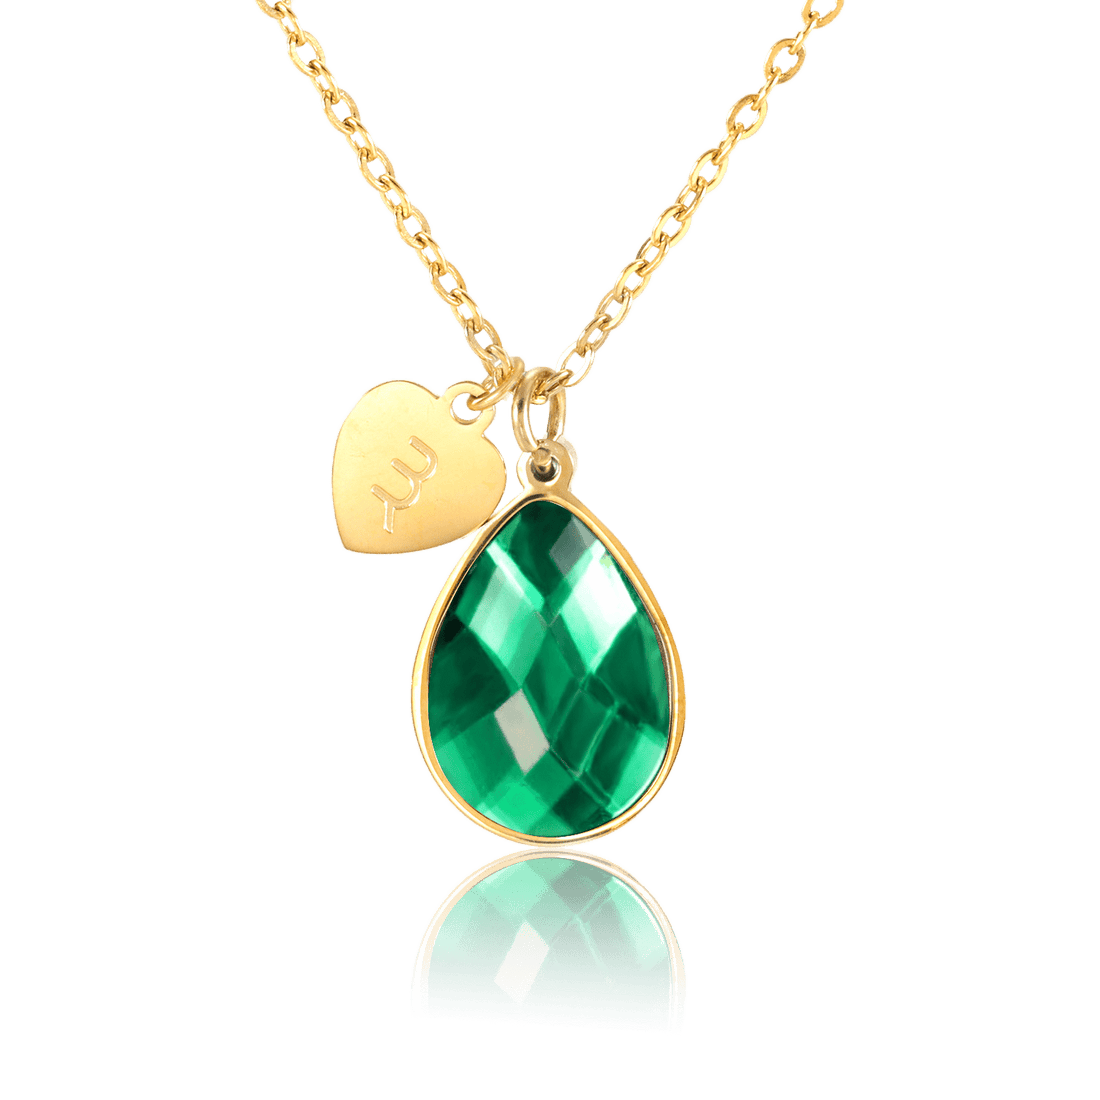 bianco rosso Necklaces Gold May Birthstone - Emerald cyprus greece jewelry gift free shipping europe worldwide